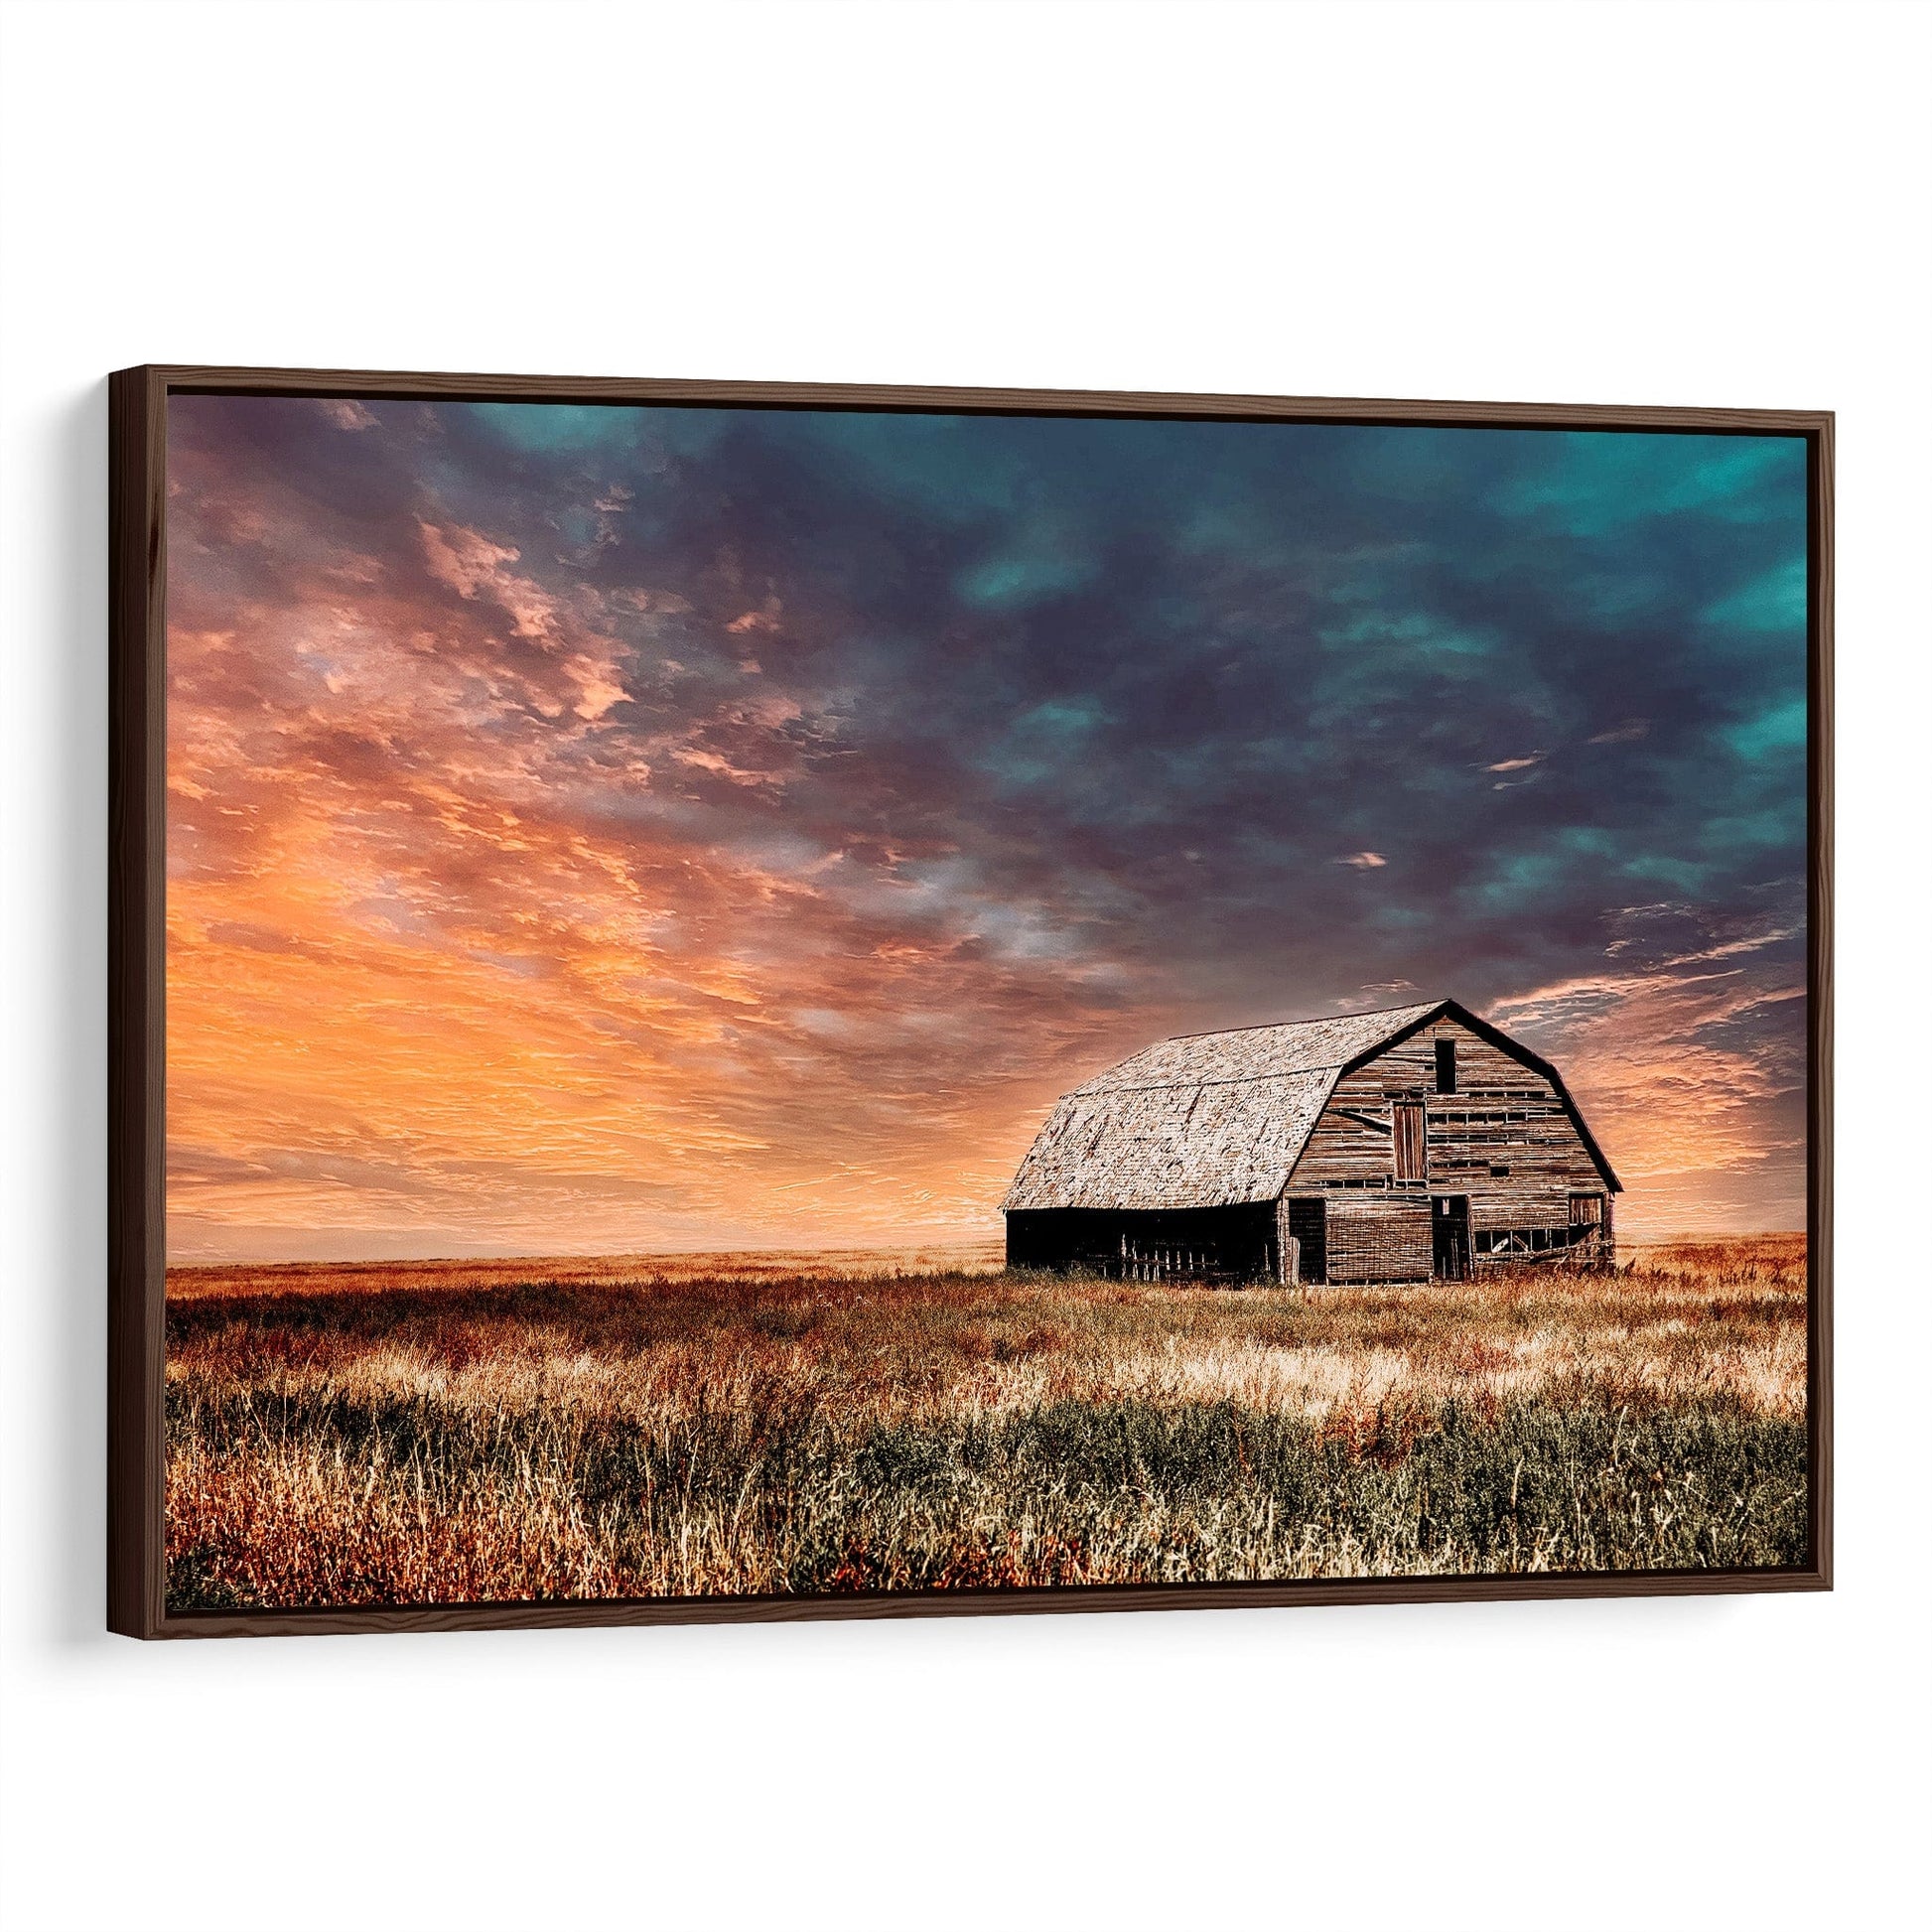 Old Barn and Colorful Sunset Wall Art Canvas-Walnut Frame / 12 x 18 Inches Wall Art Teri James Photography